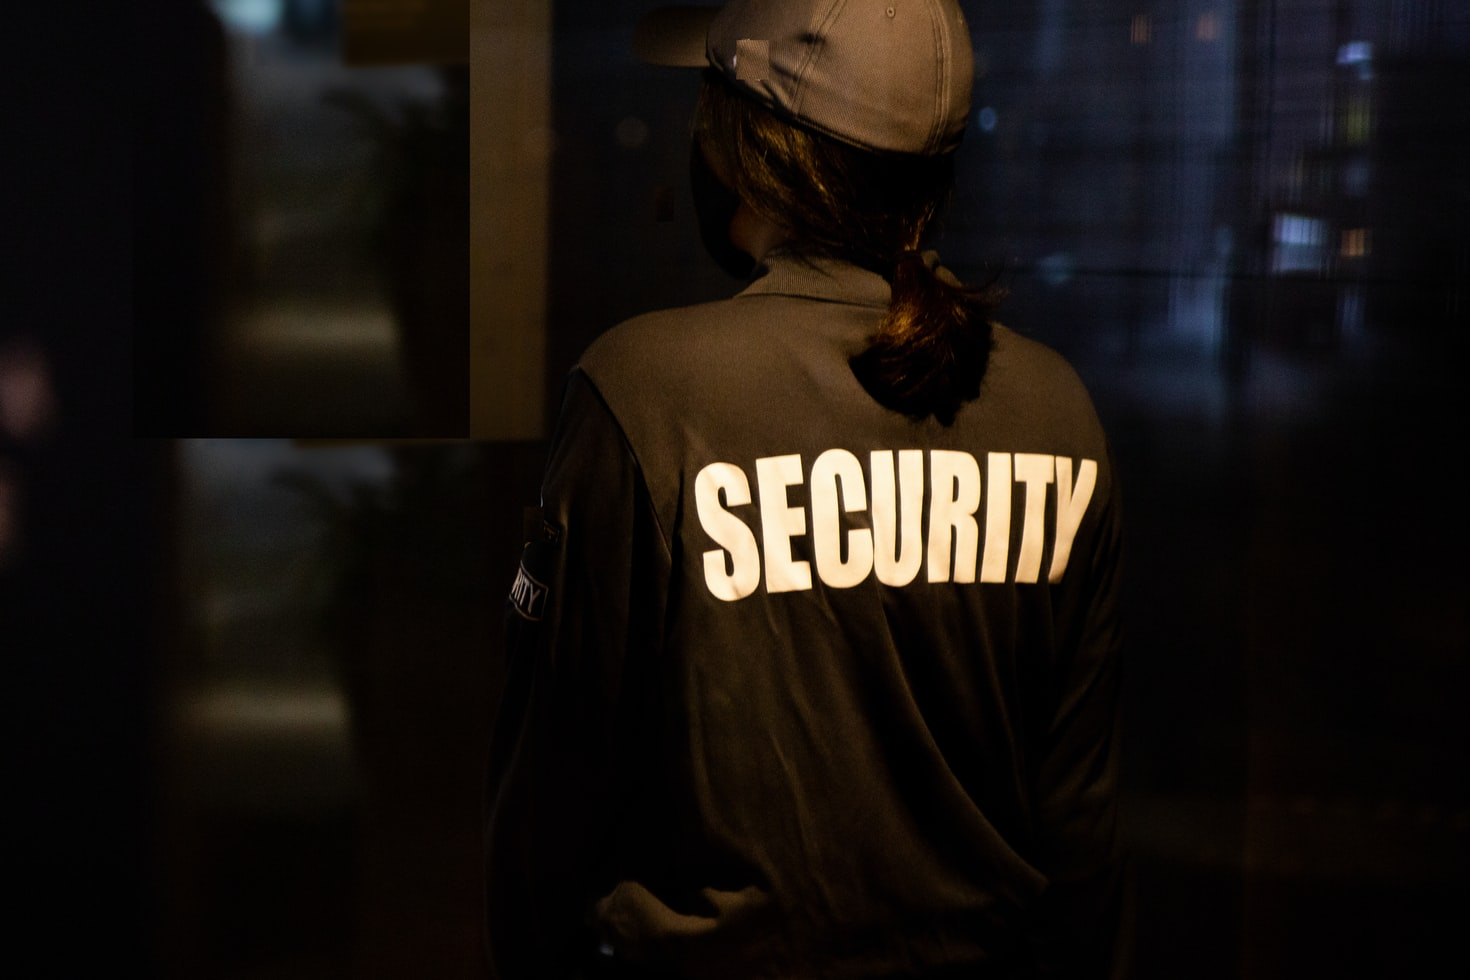 A security professional’s shirt